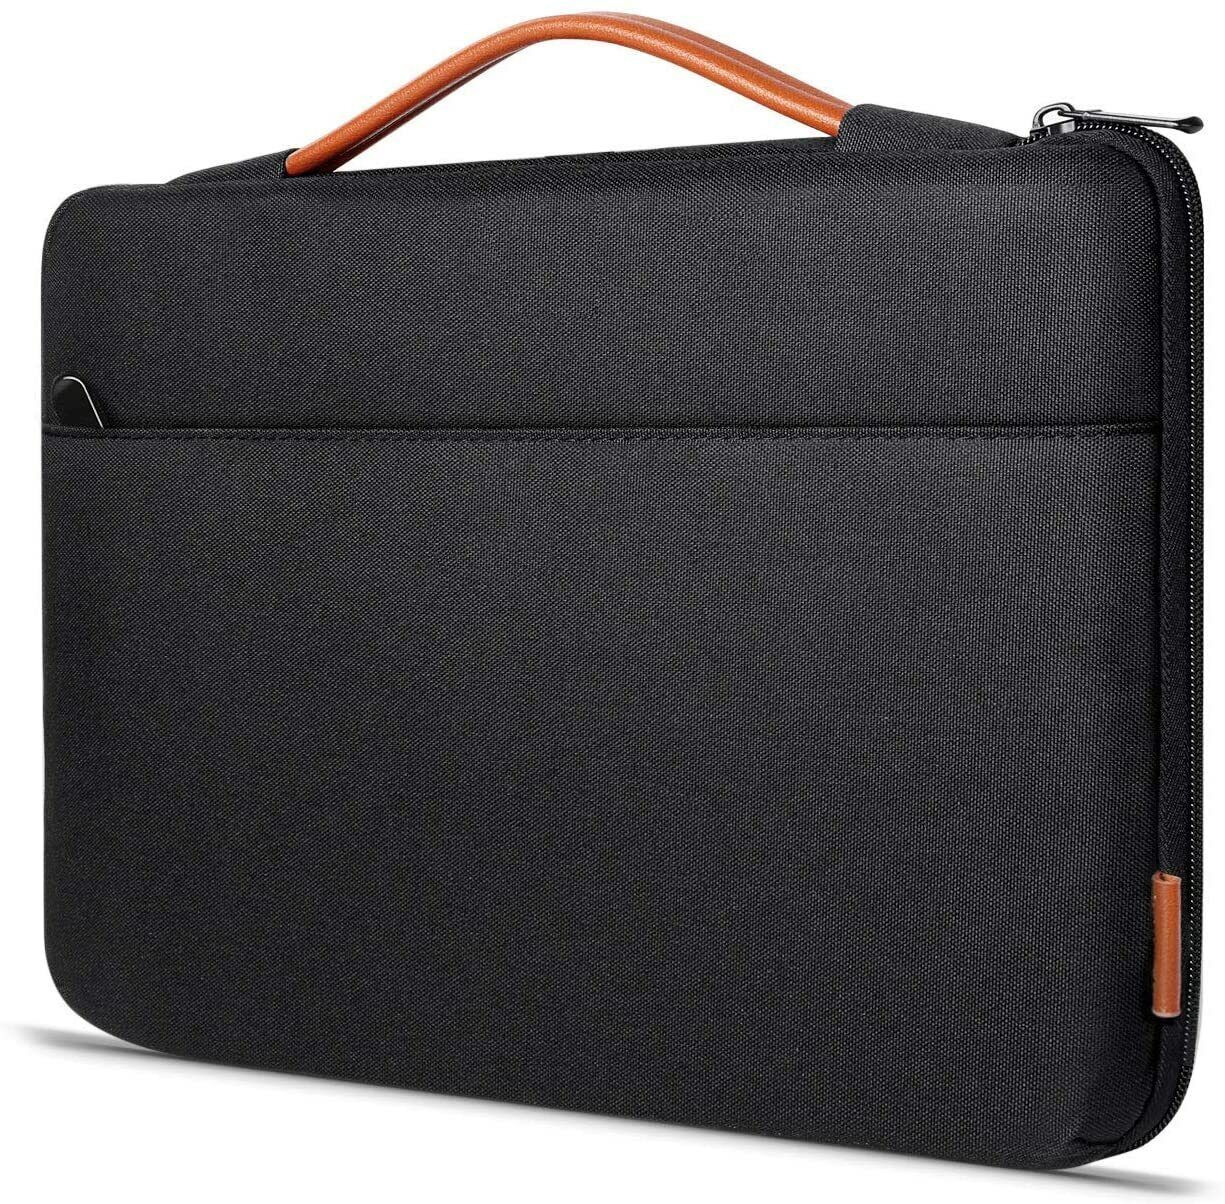 Inateck 15-15.6 Inch Sleeve Case Briefcase Bag Shockproof For 15" 15.6" Laptops